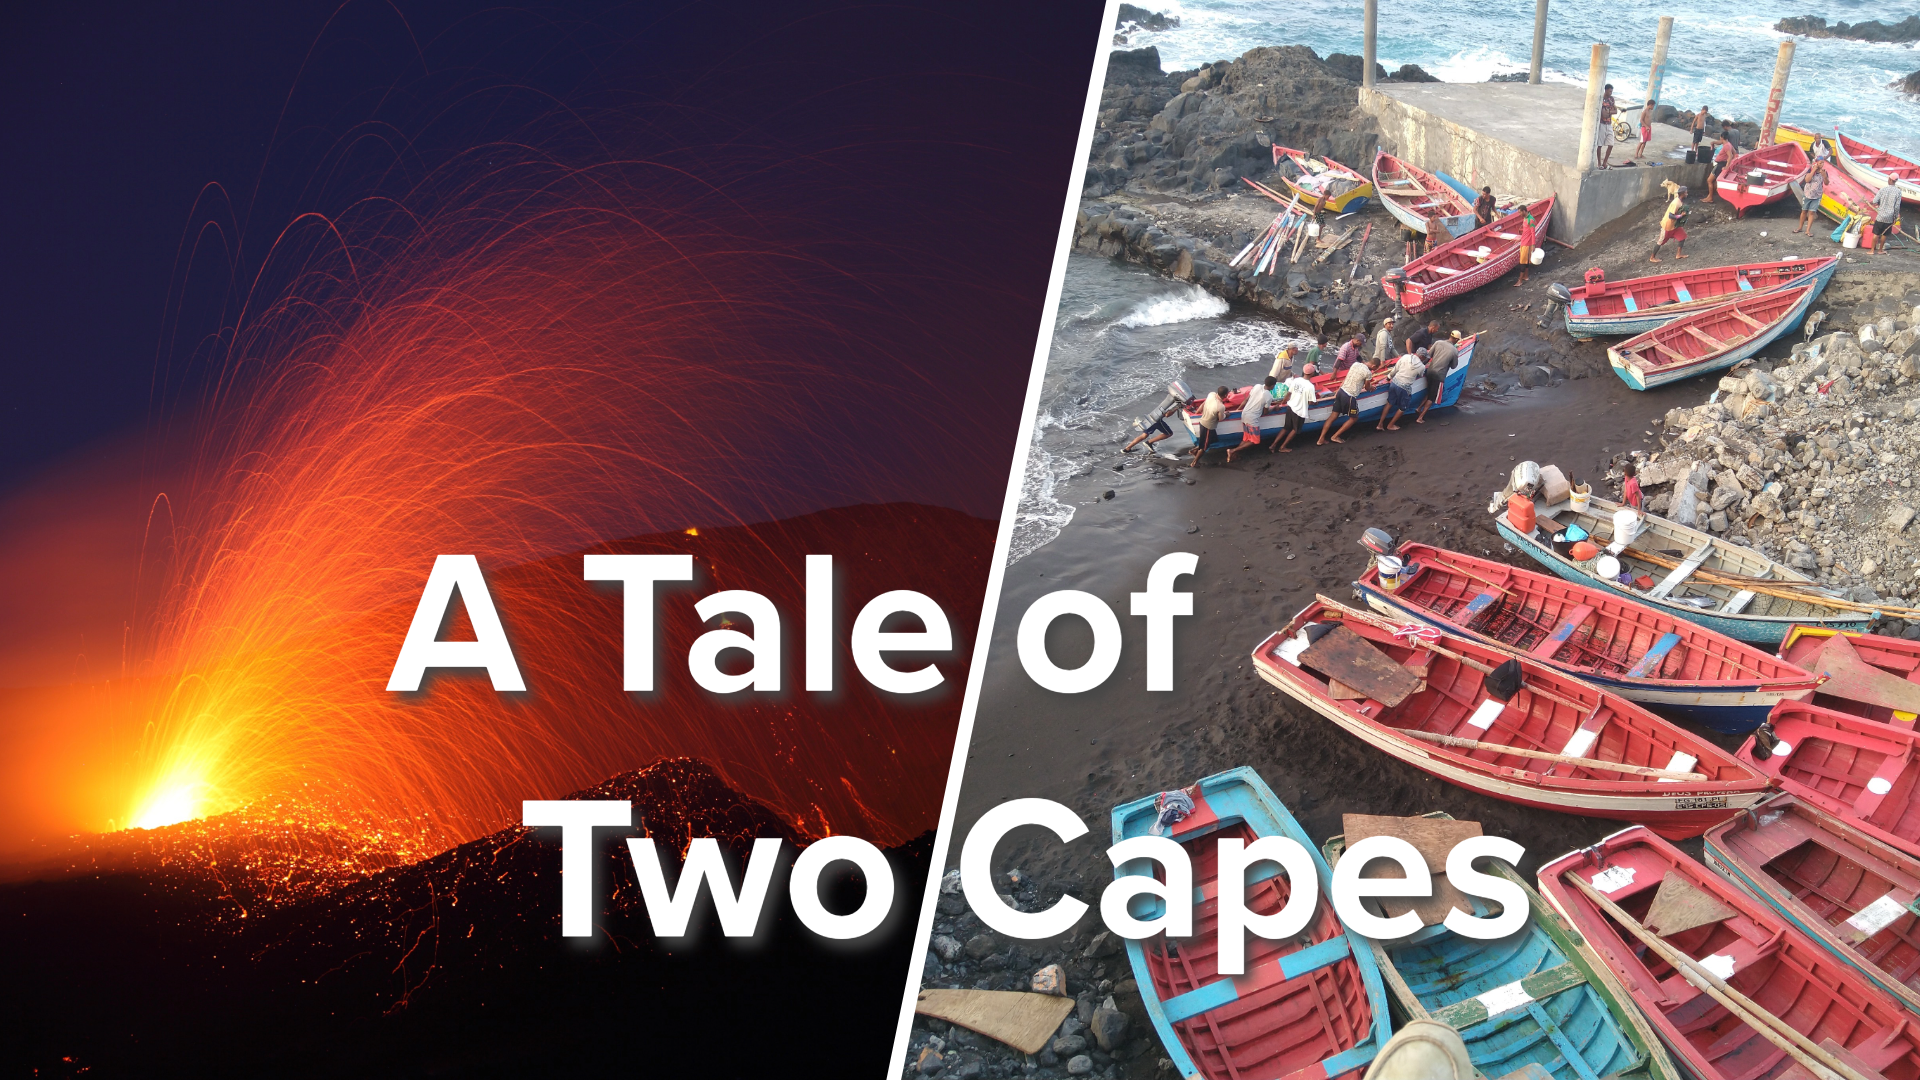 Tale of Two Capes -- 2 videos